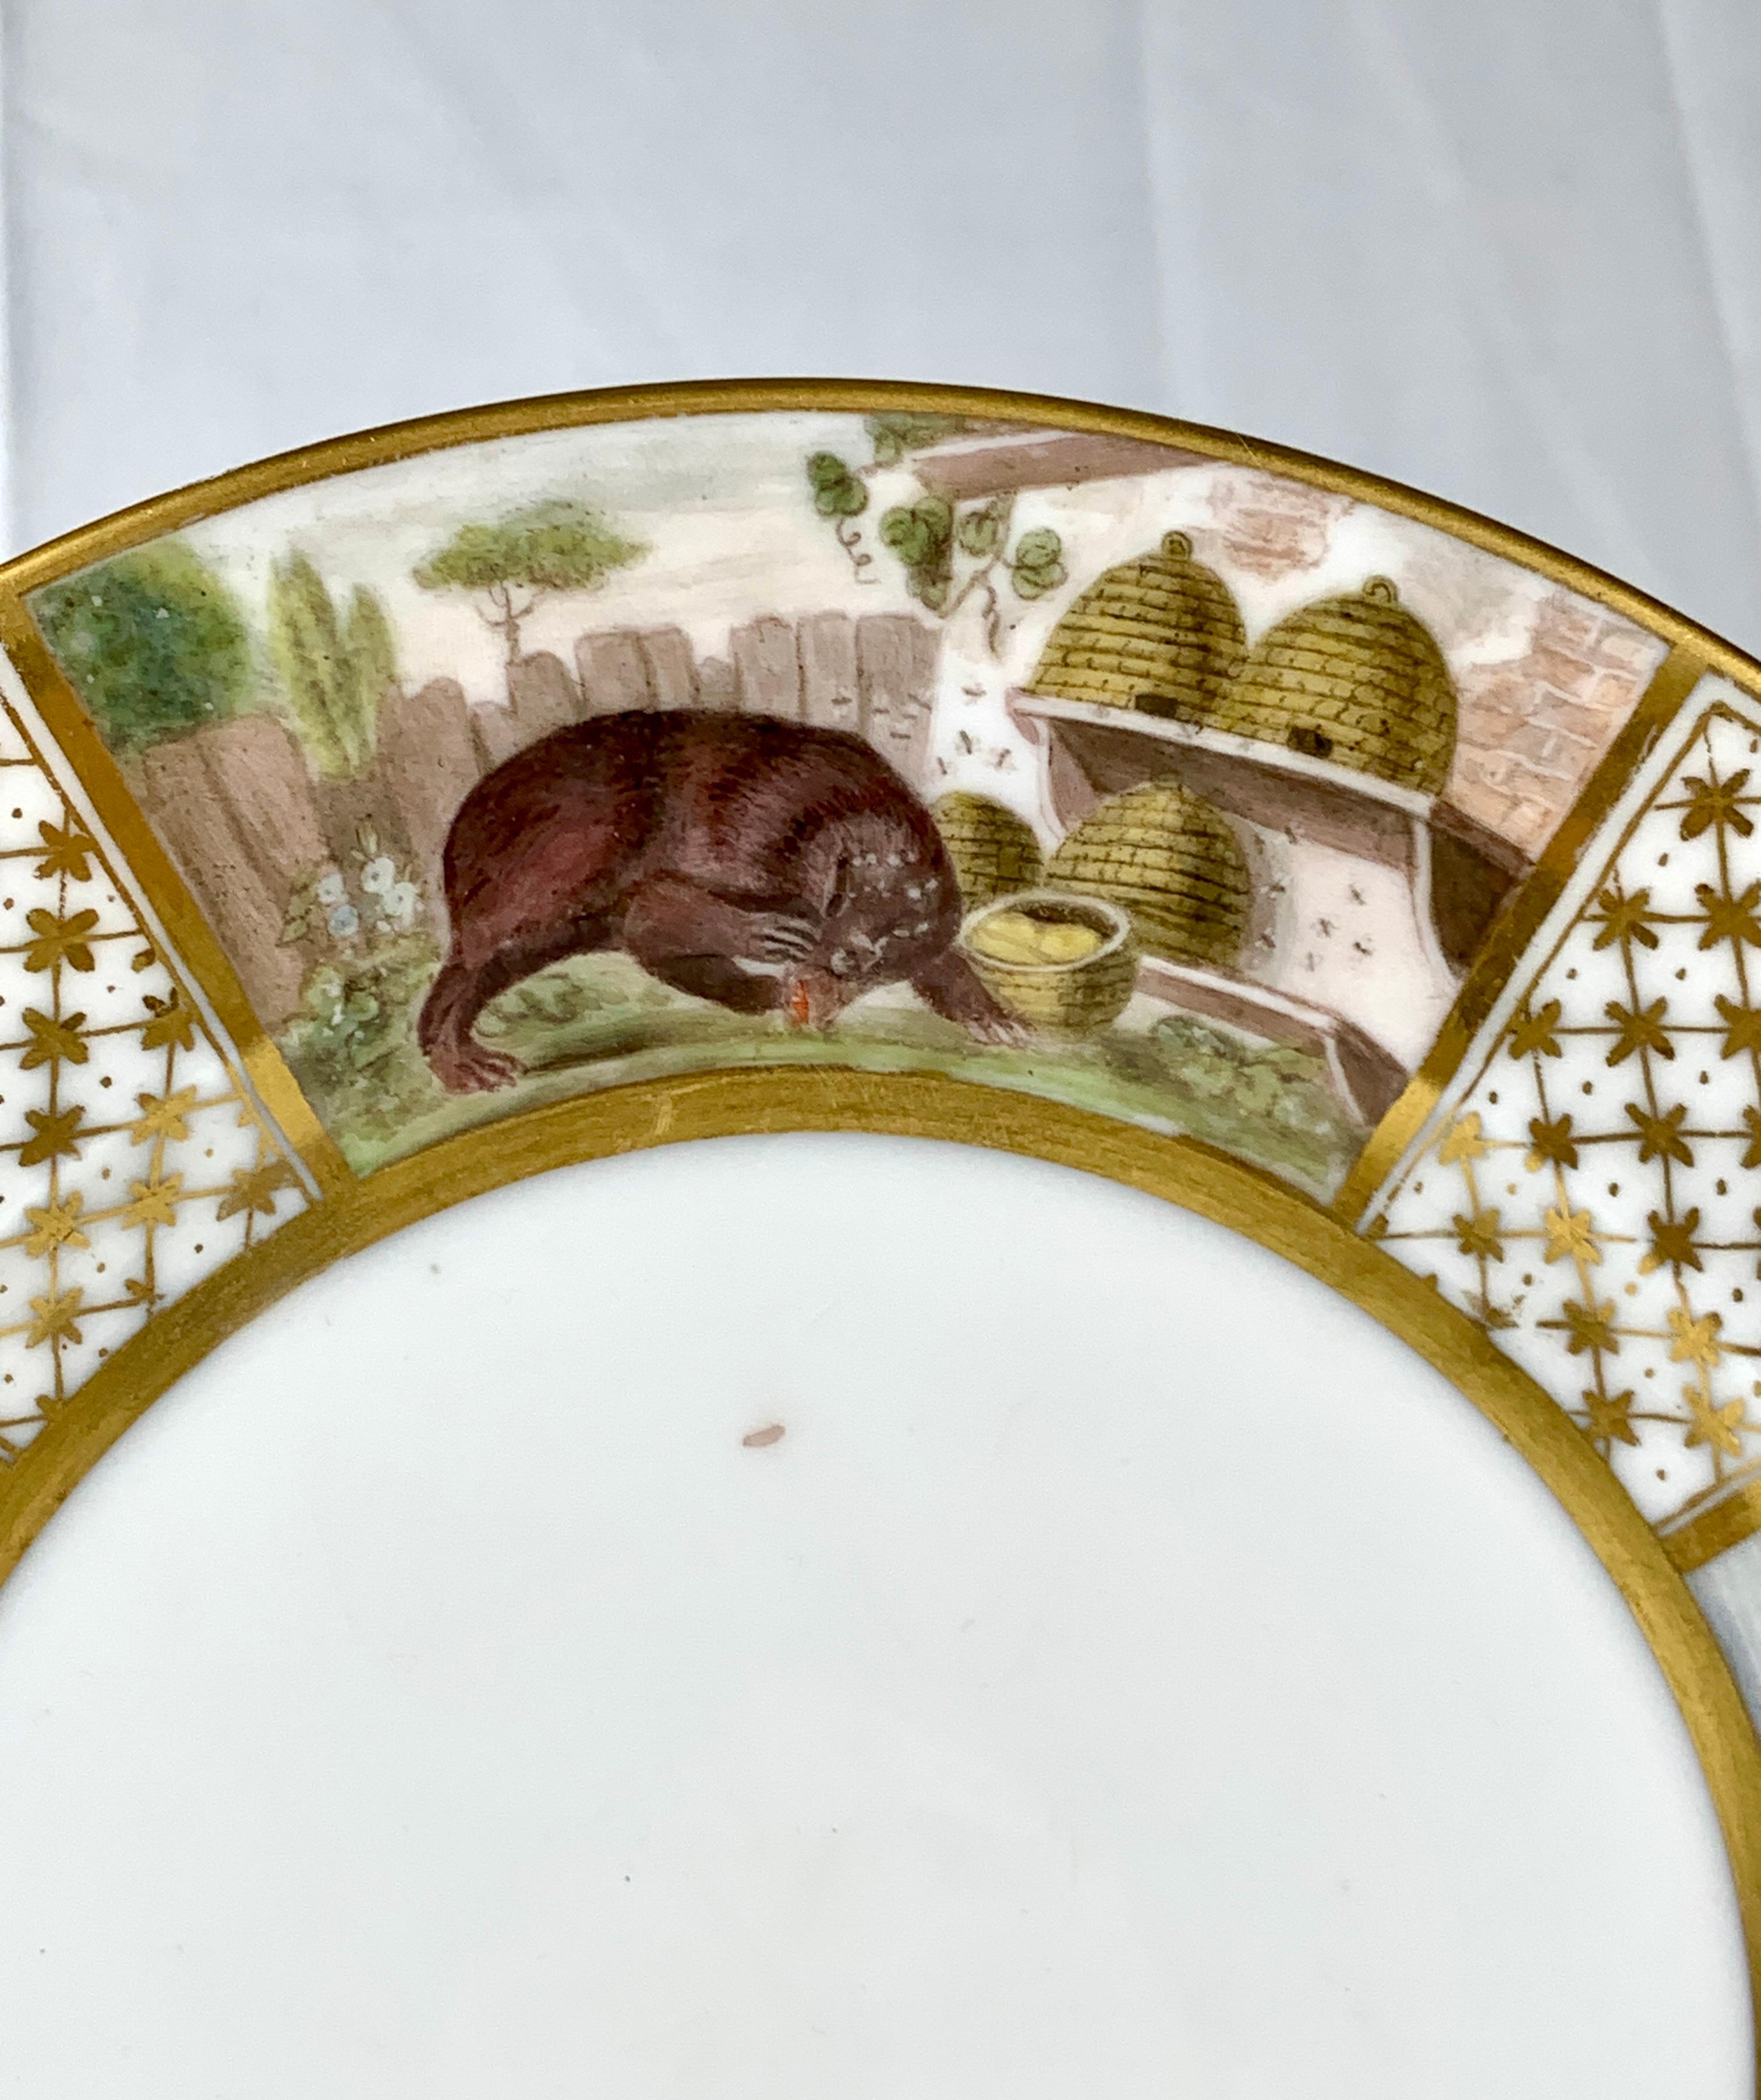 Rococo Aesop's Fables Animals on Antique French Porcelain Plate Hand Painted circa 1825 For Sale